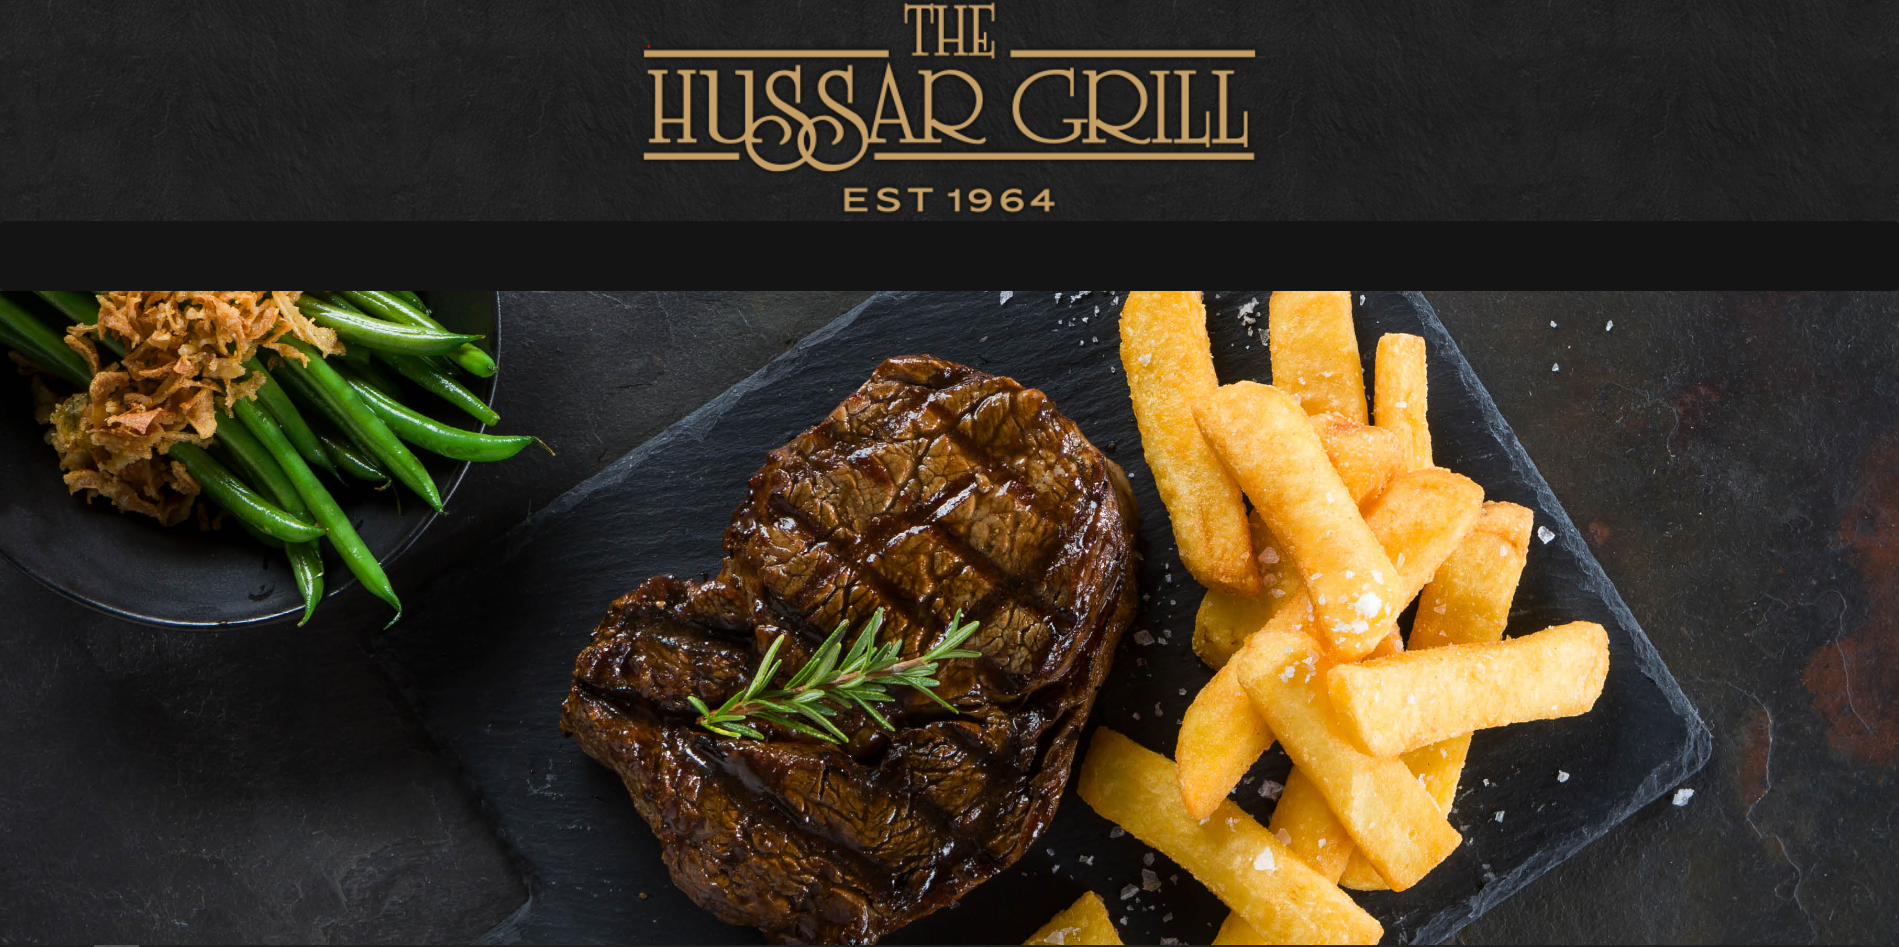 Hussar Grill Montecasino DineJoziStyle